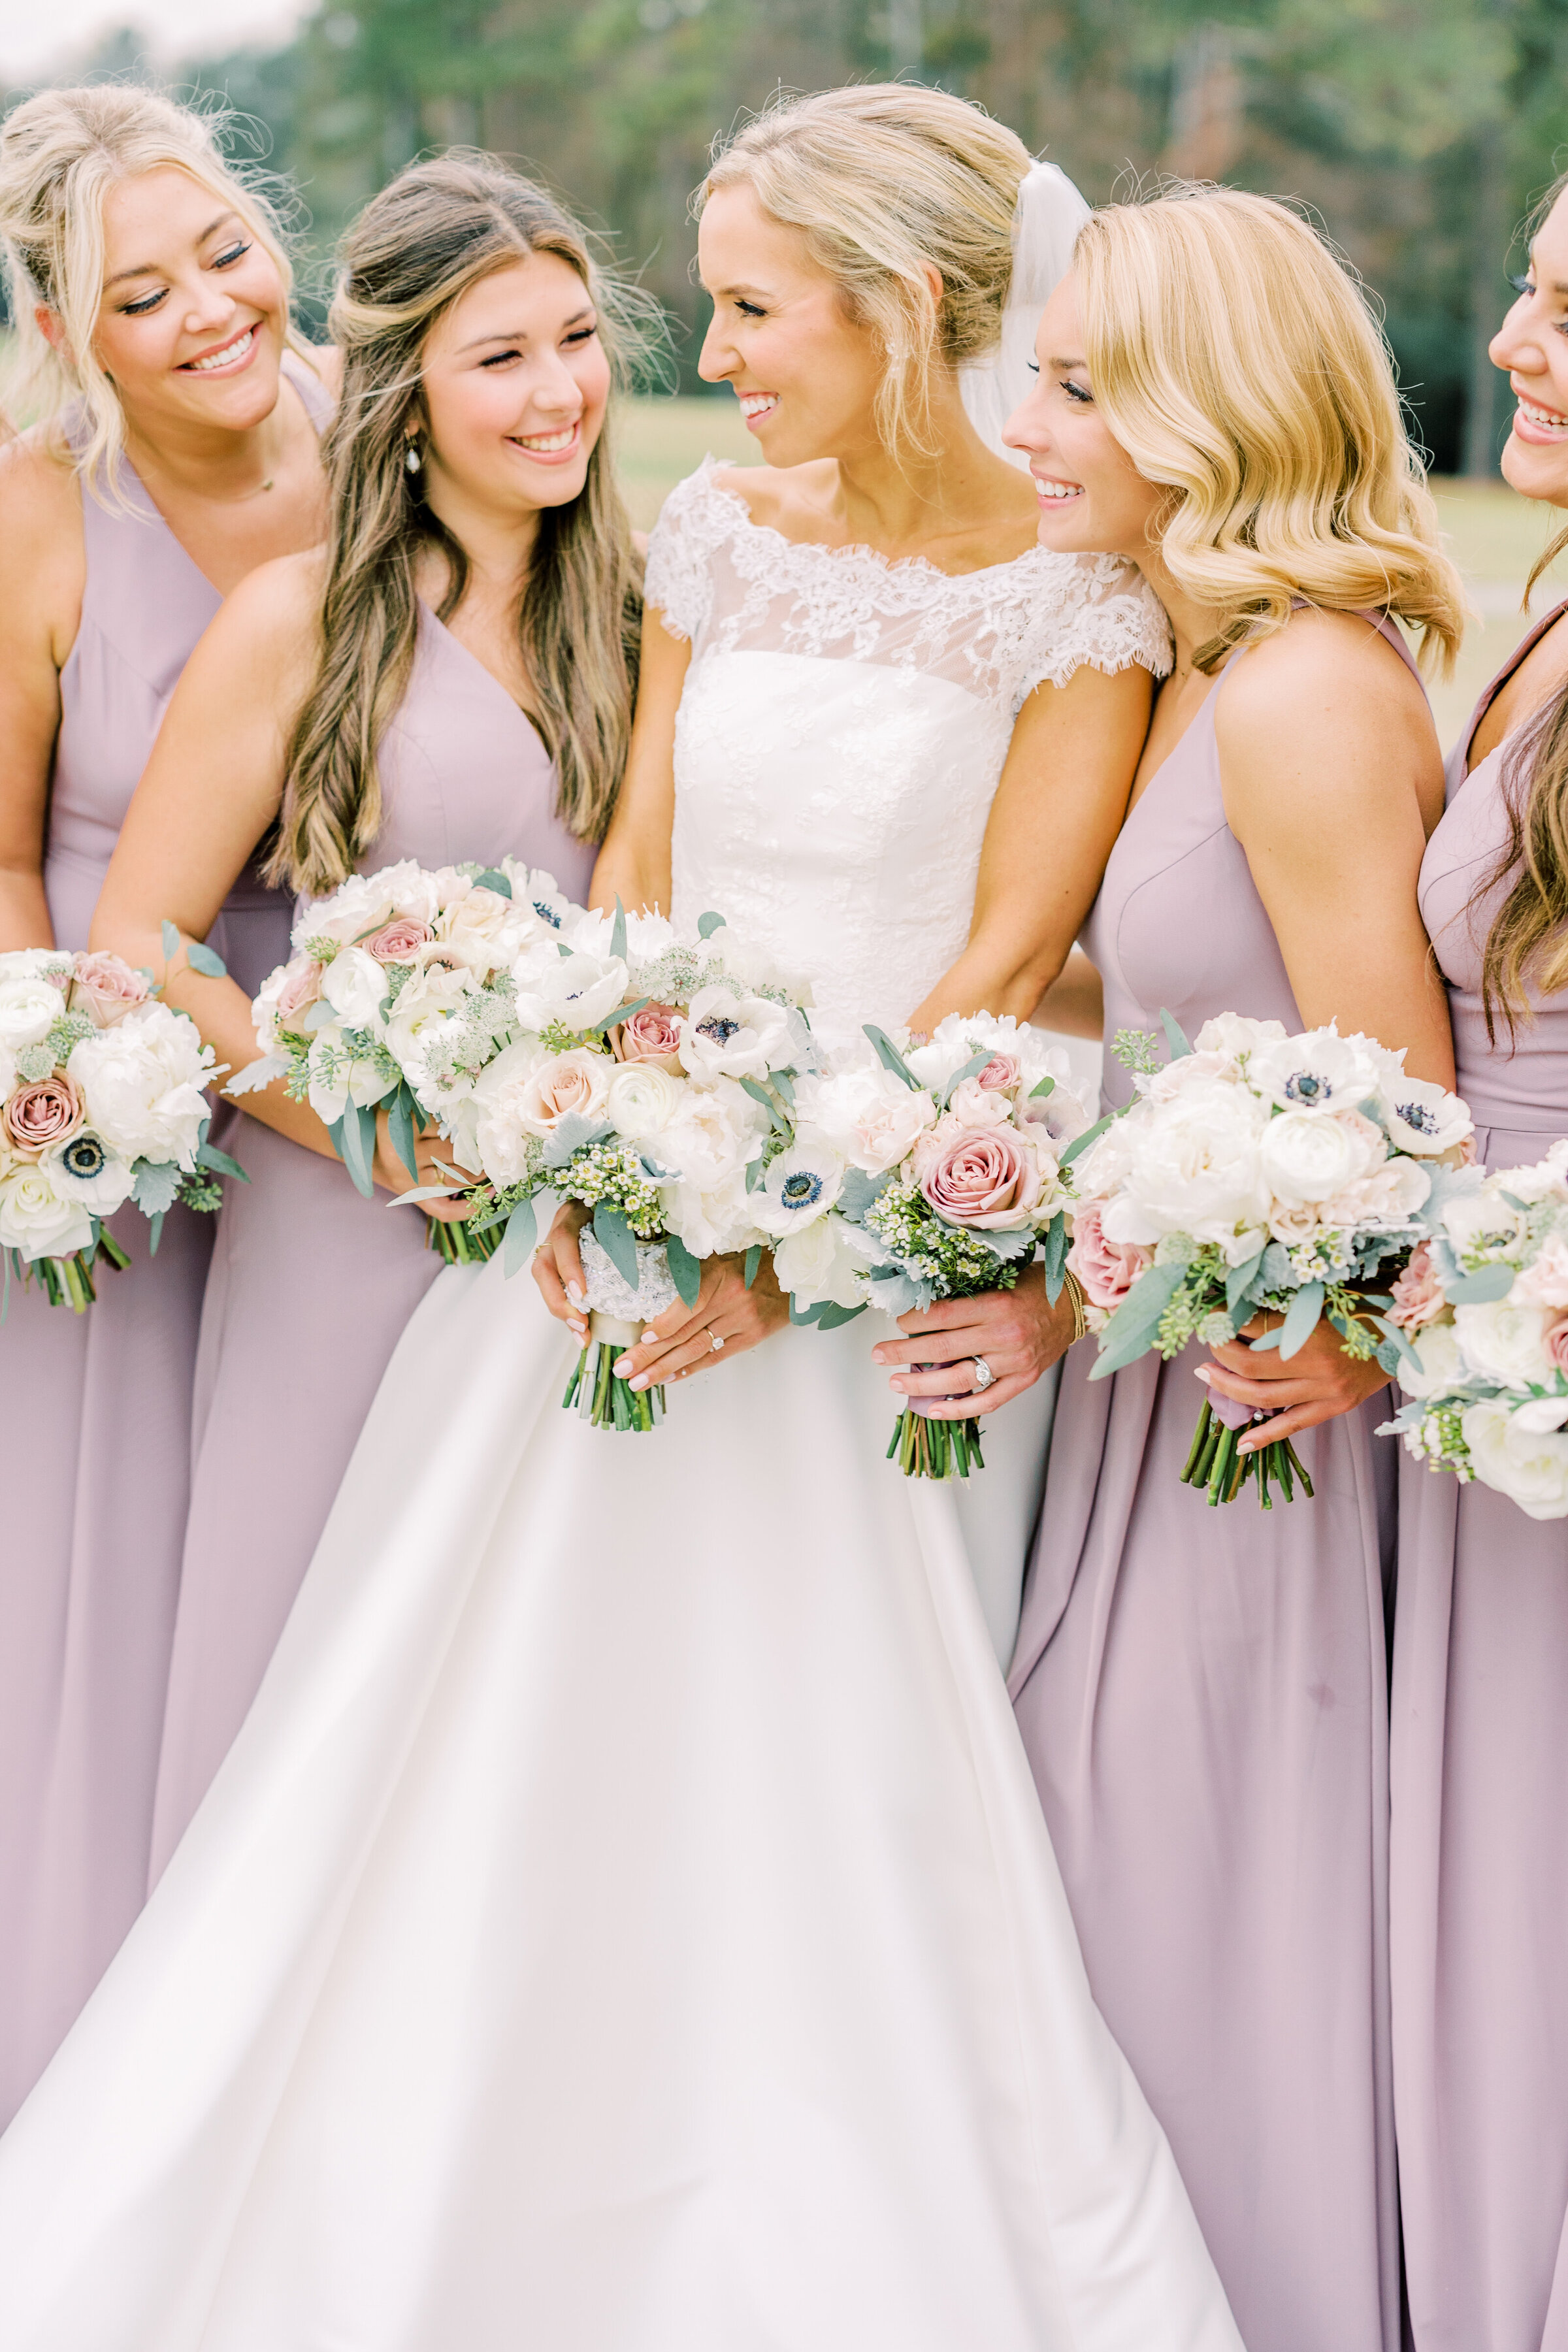 Bride standing with bridesmaids in purple dresses holding white flower bouquets